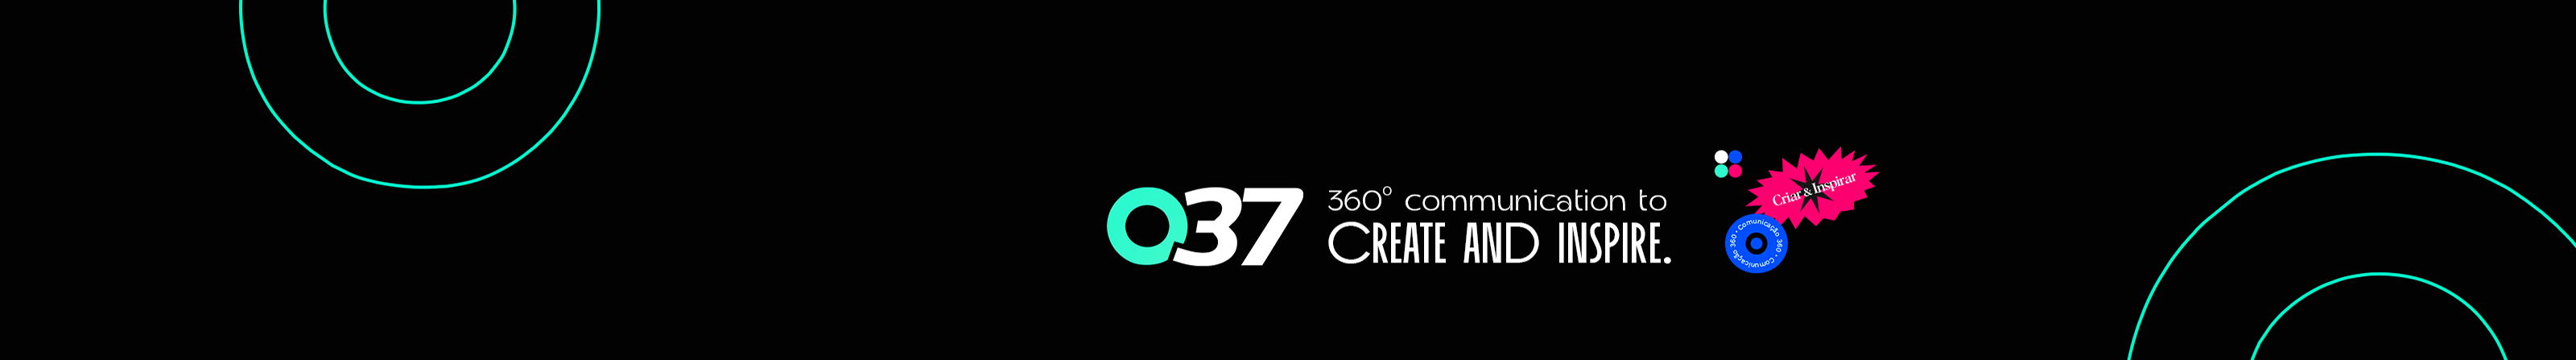 037 Creations's profile banner